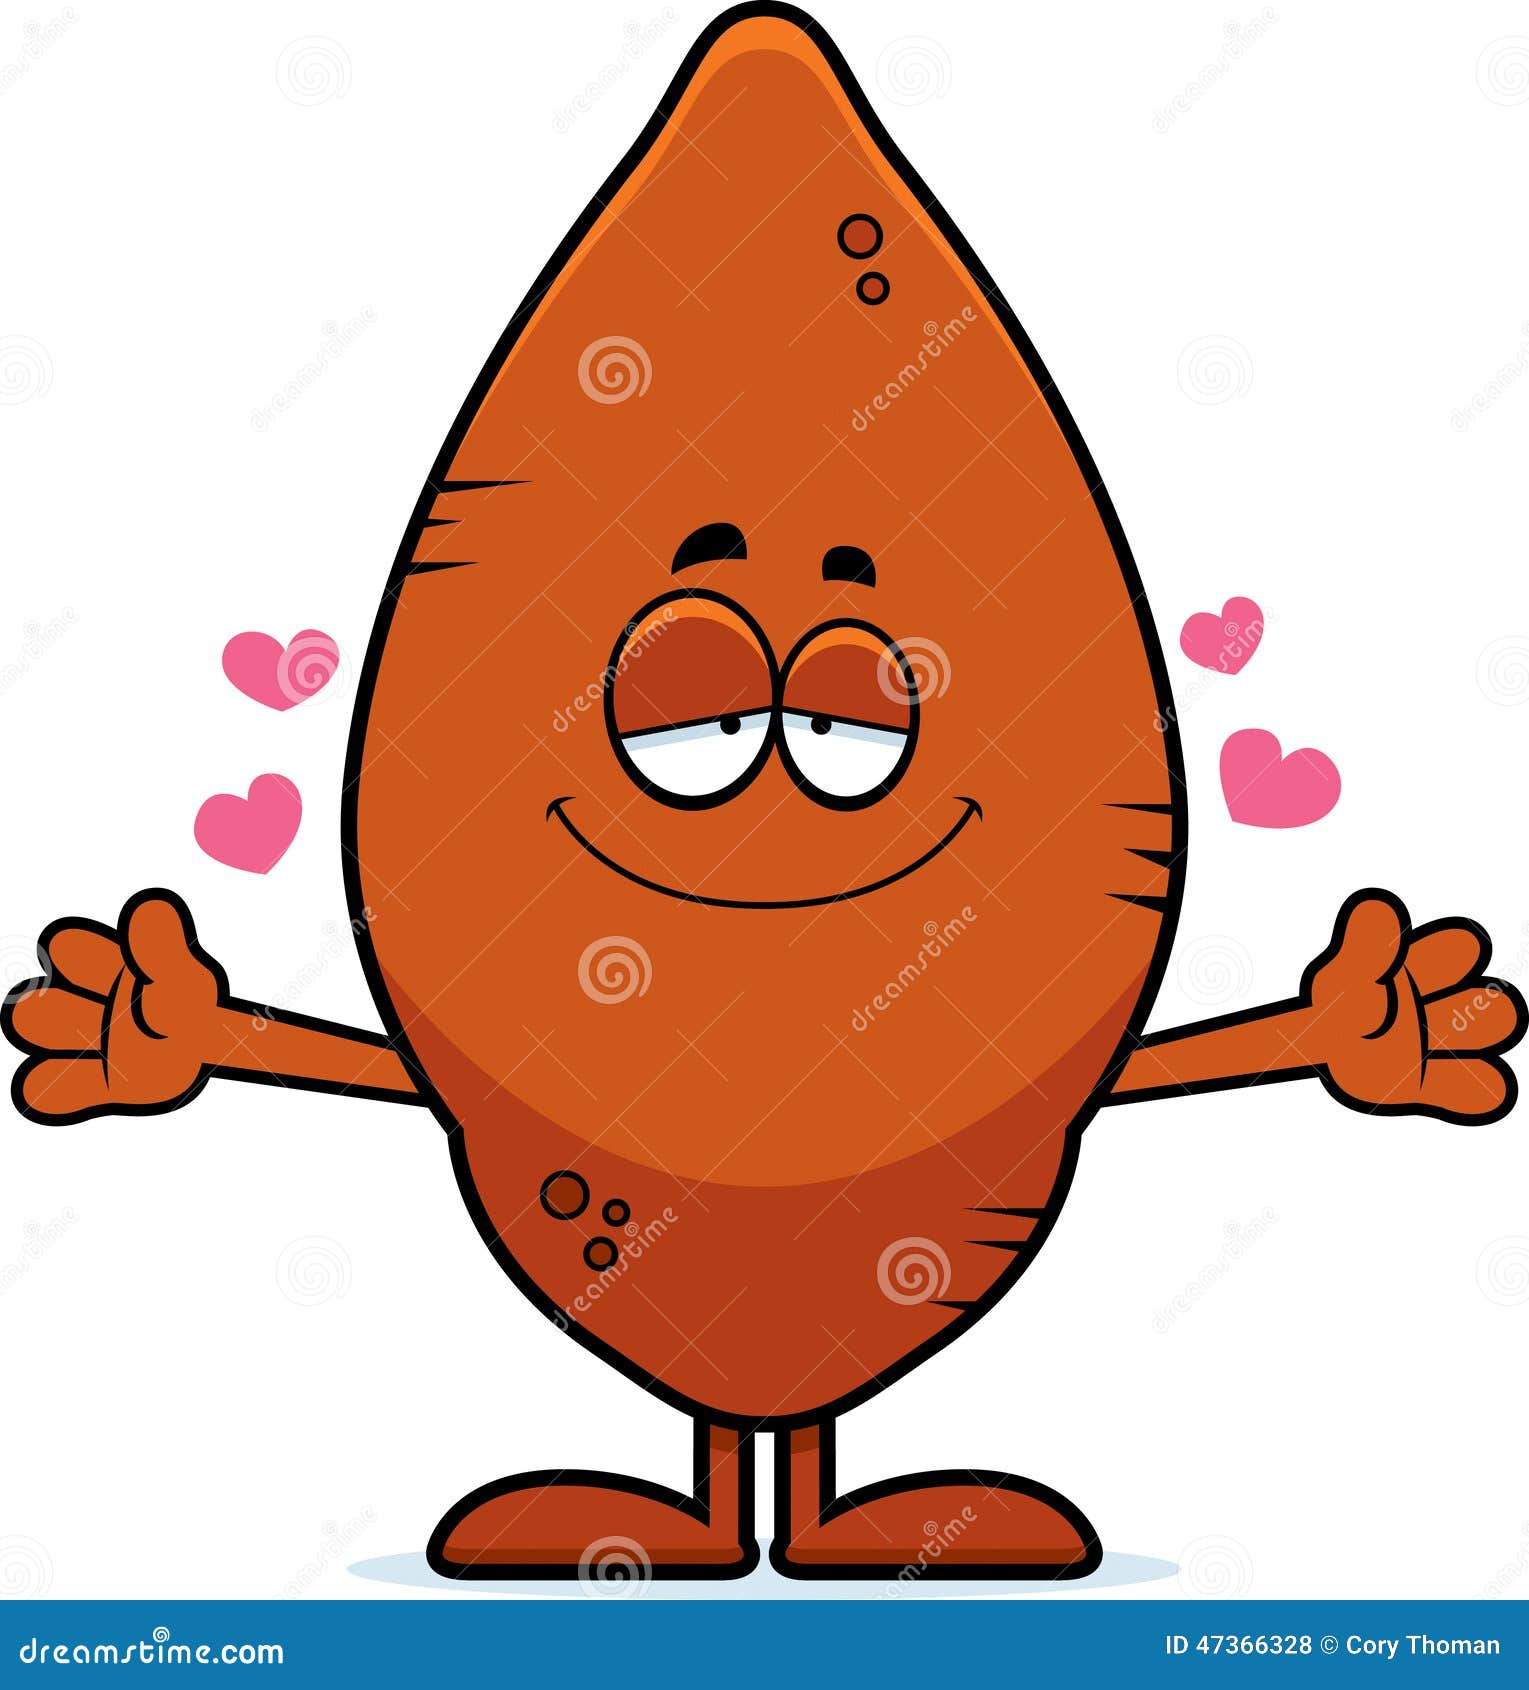 clipart of yam - photo #49